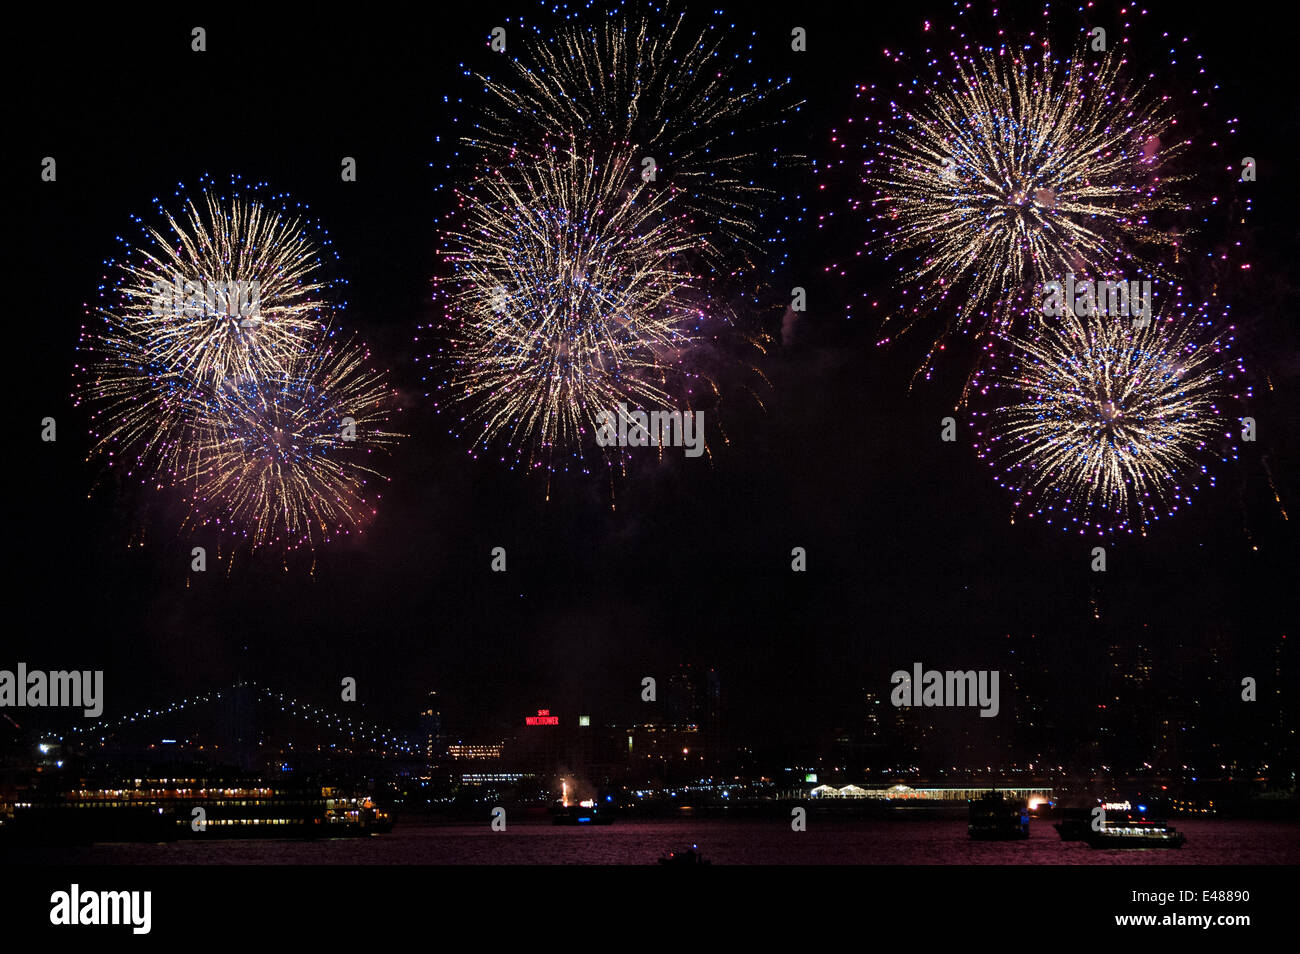 New York, US. July 4th, 2014. Fireworks exploded on the East River over the Brooklyn Bridge in celebration of the signing of the Declaration of Independence 238 years ago, when the American colonies declared their independence from Great Britain Credit: © Terese Loeb Kreuzer/Alamy Live News  Stock Photo